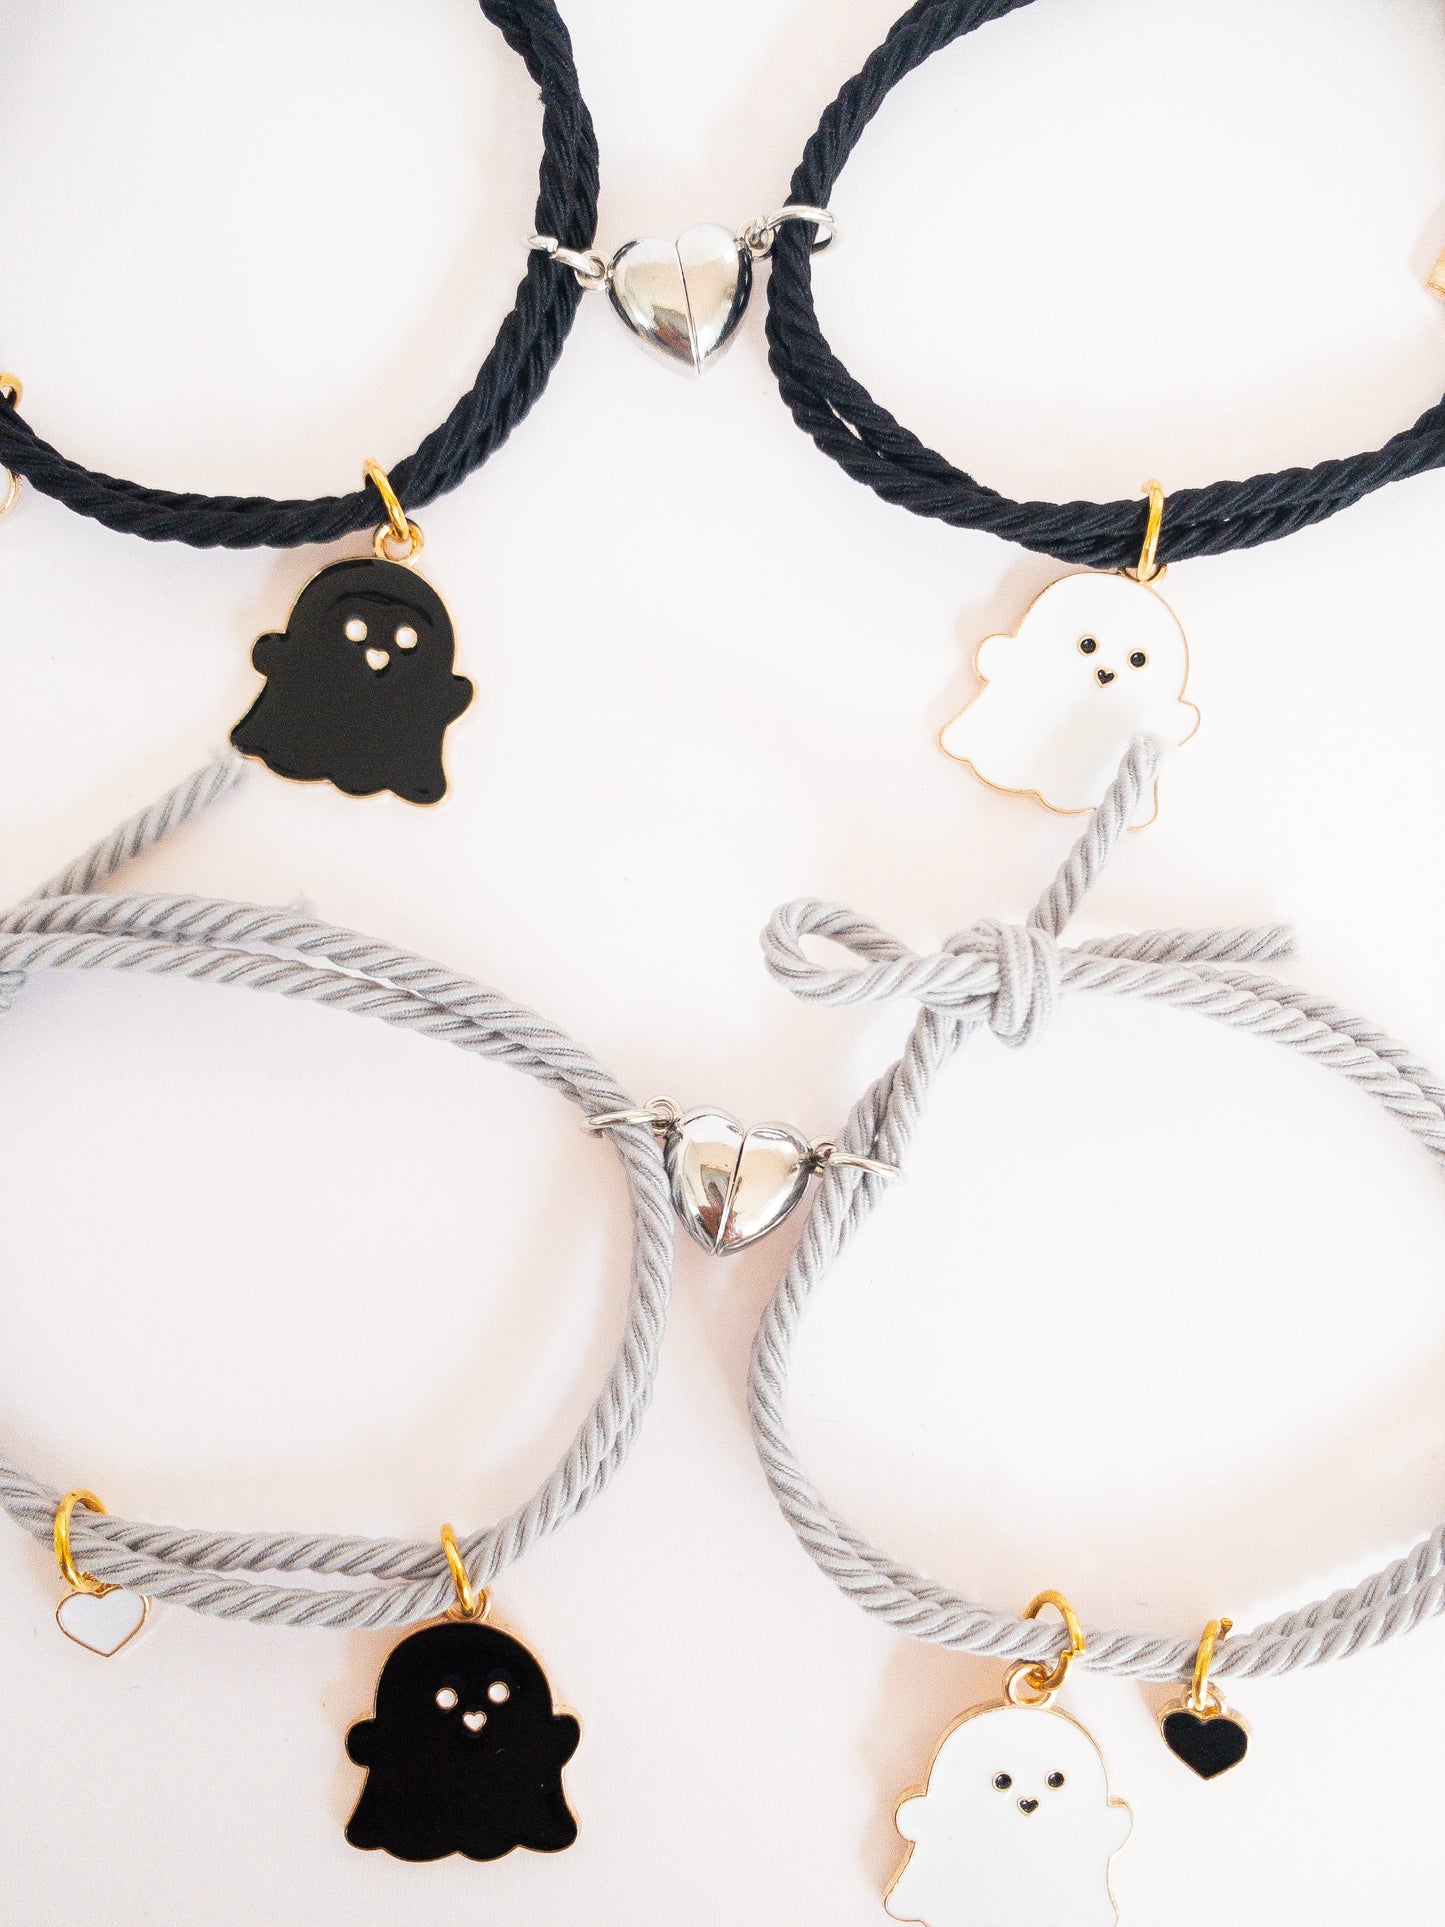 These ghostie besties are hard to keep apart! Two sets of lovable ghost hair ties that pull together when each half heart magnet matches up. They can be used as hair ties or kept on your wrist as bracelets--either way, a sweet way to remember your bestie.